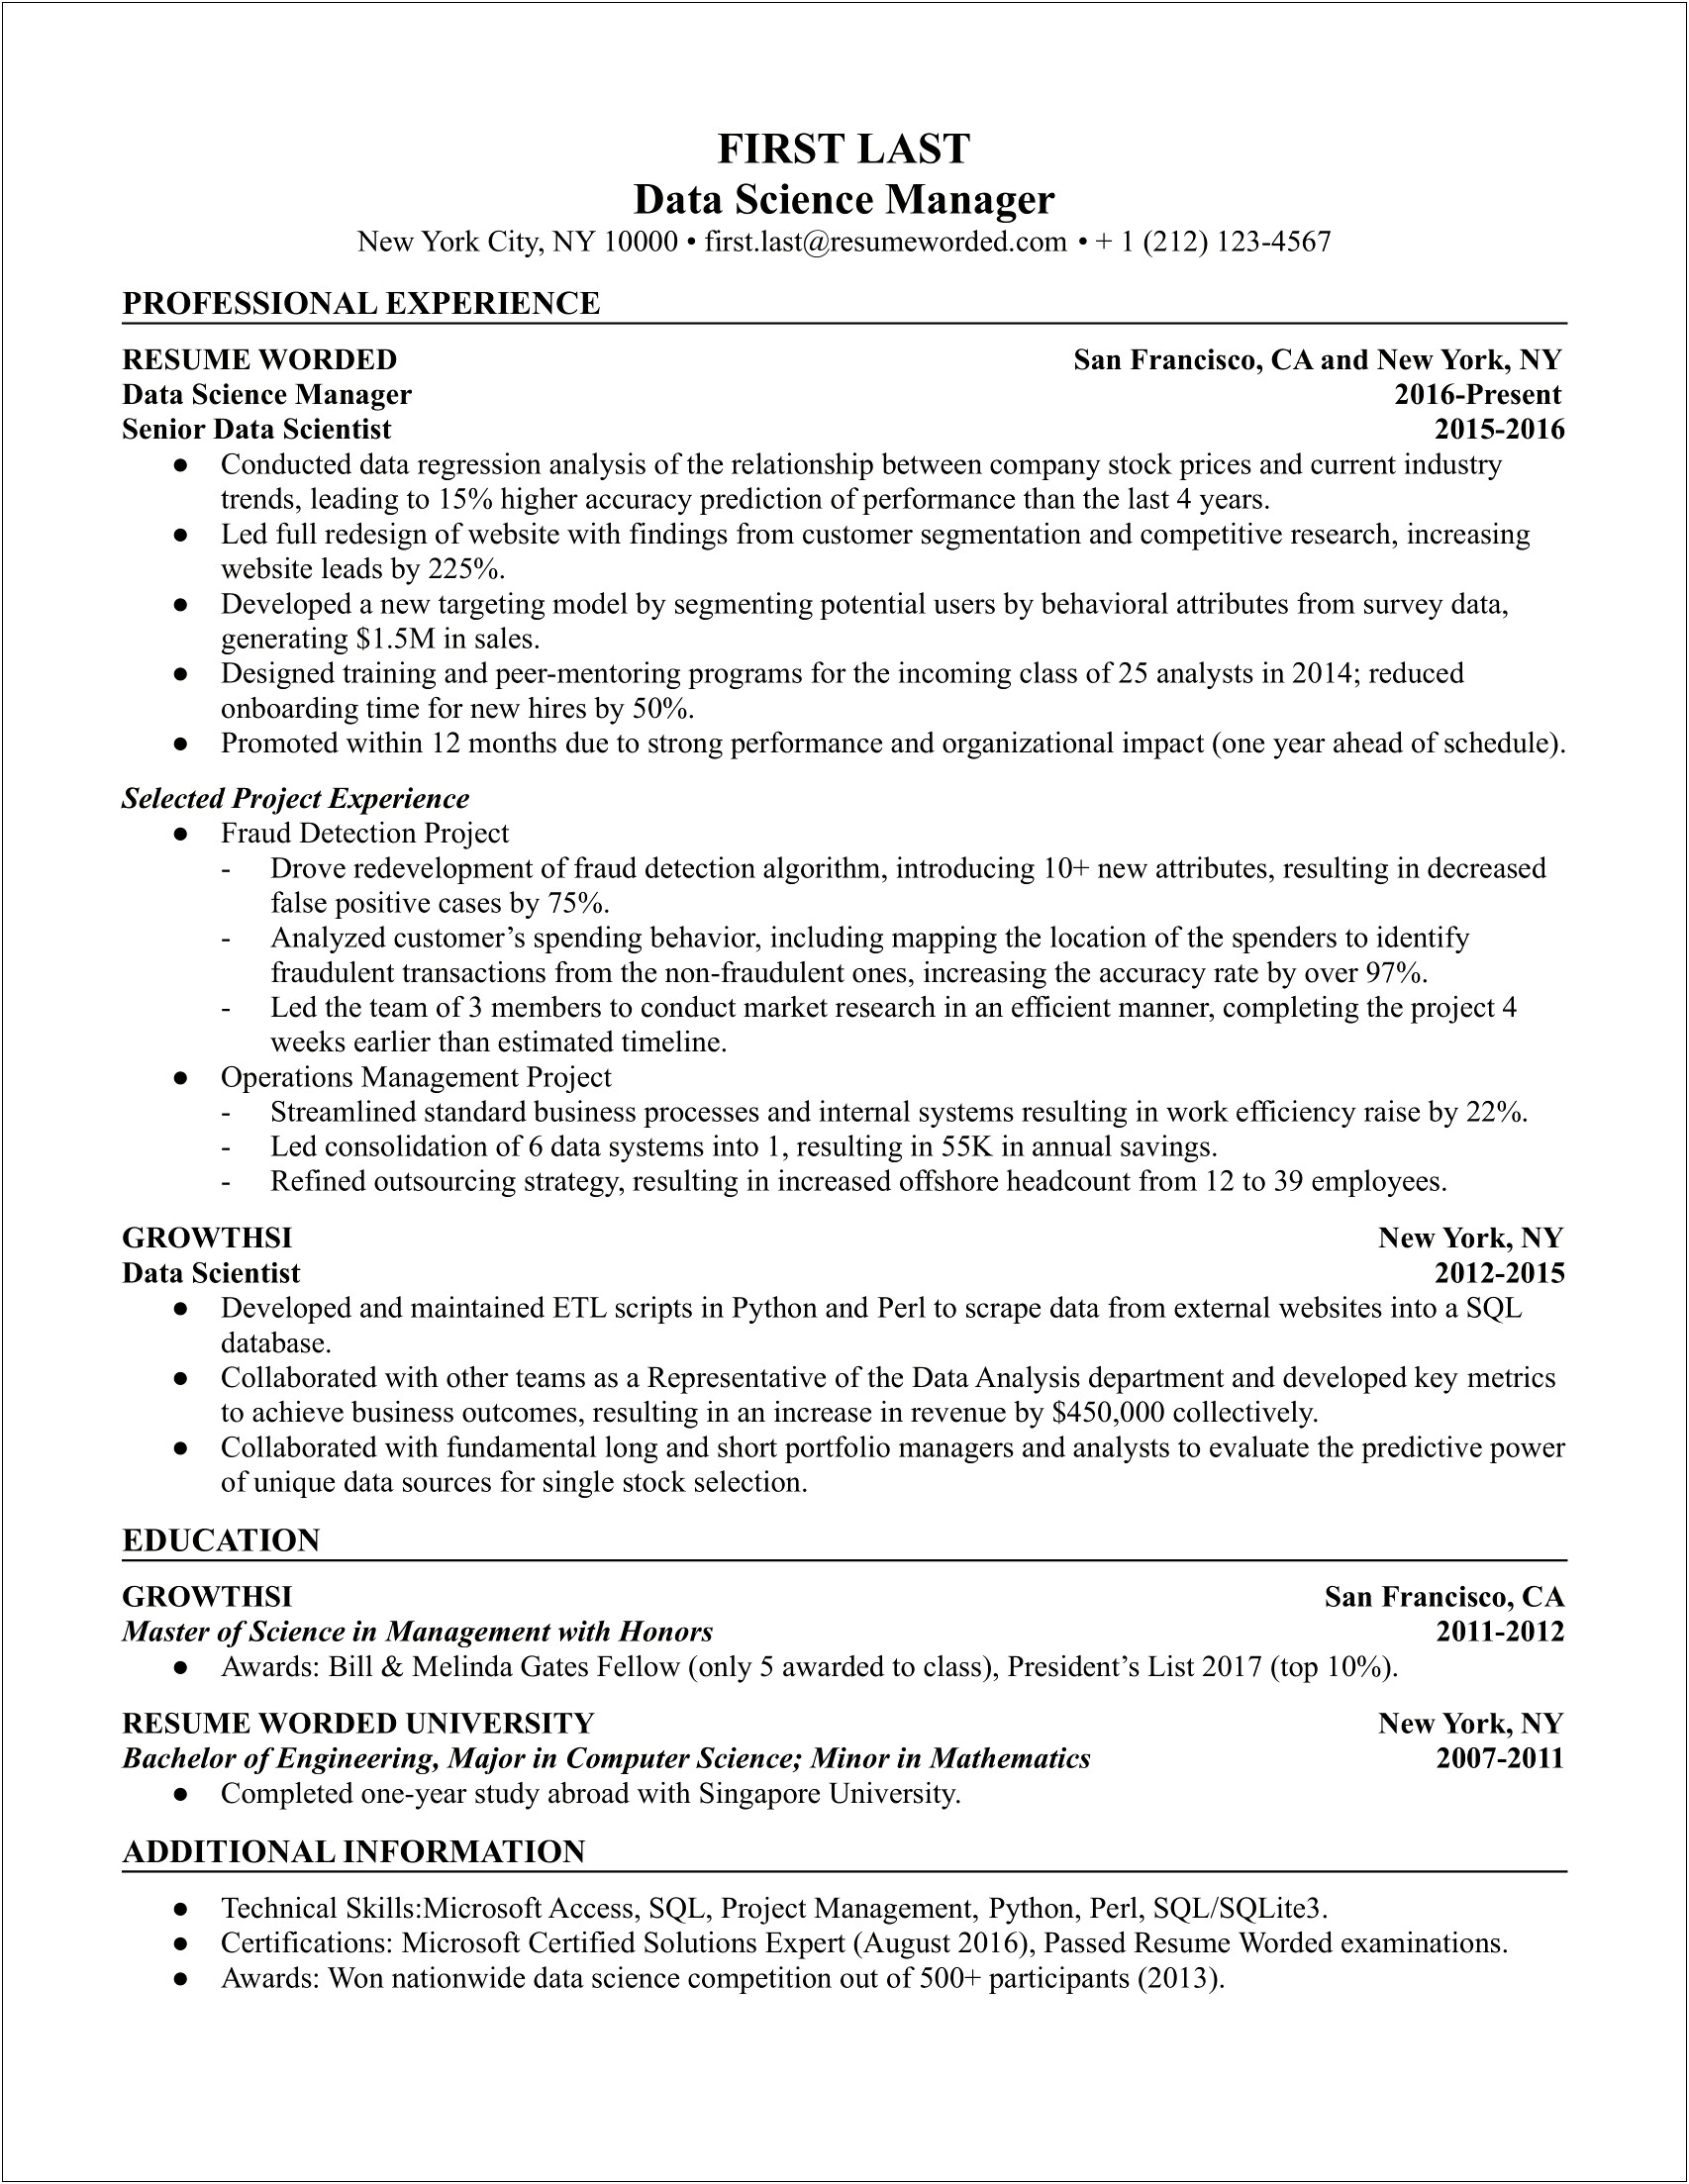 Data Scientist Resume 2 Years Experience